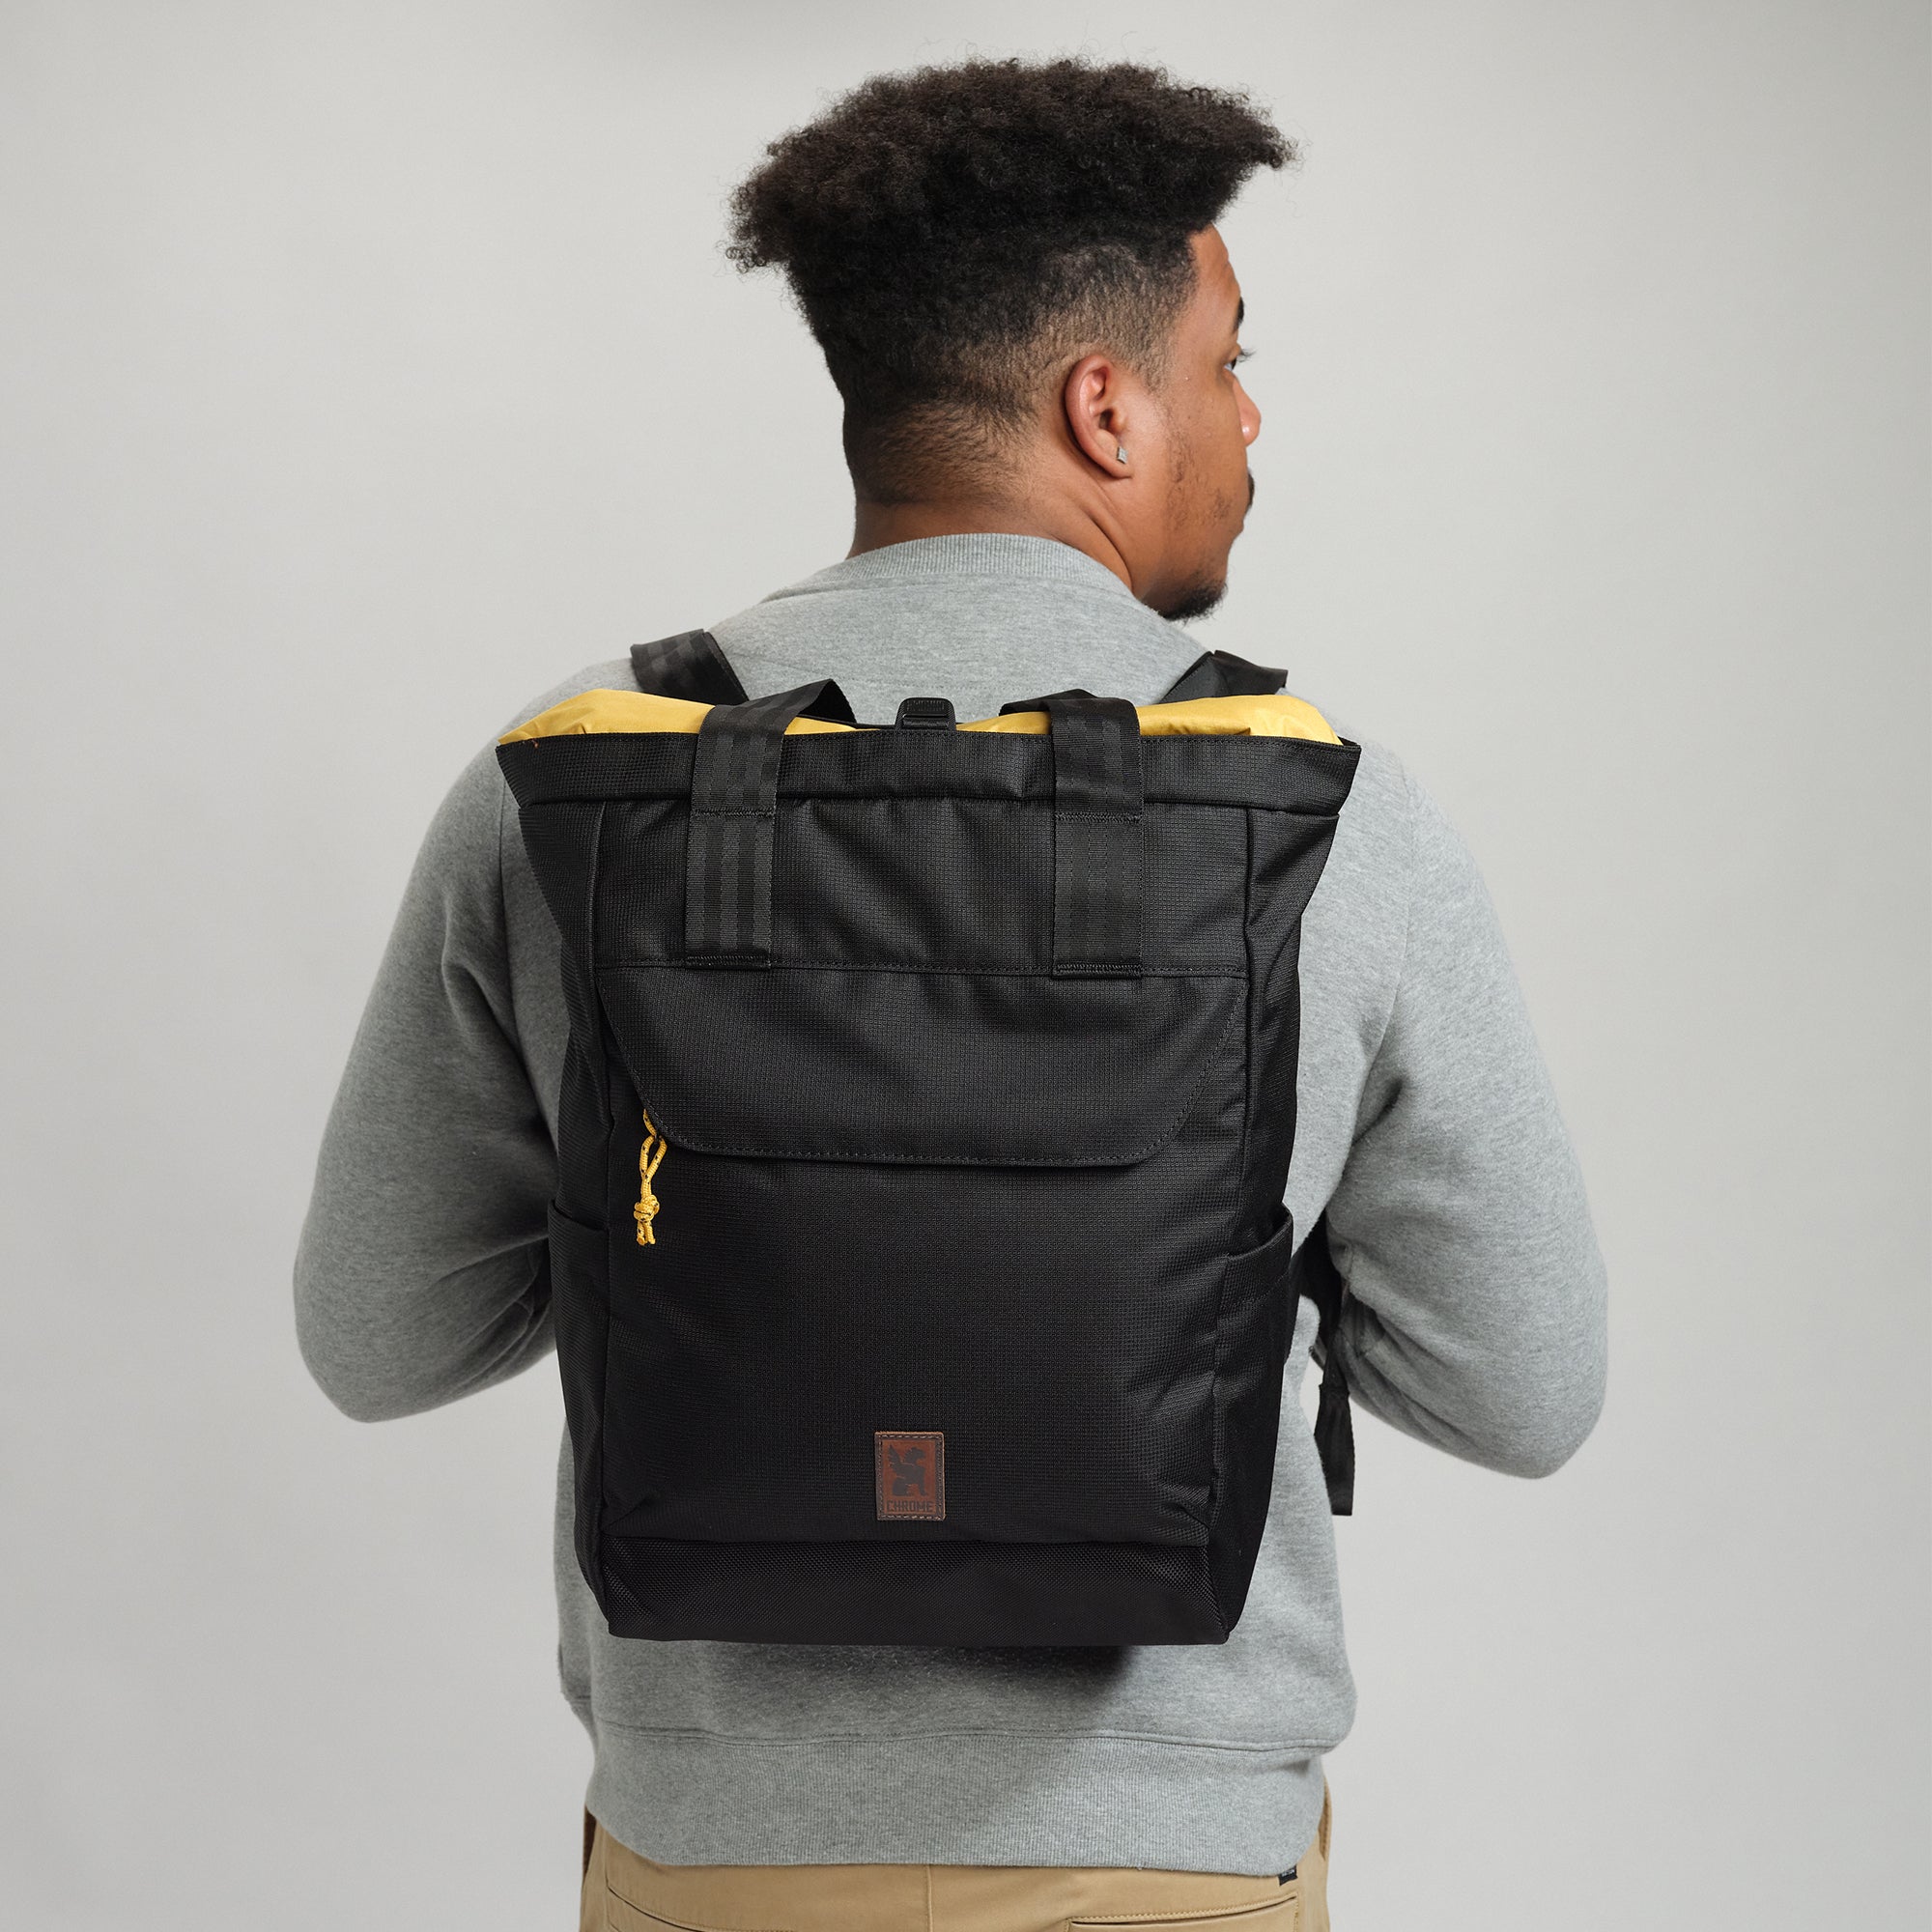 Ruckas Tote in black on a man worn as a backpack